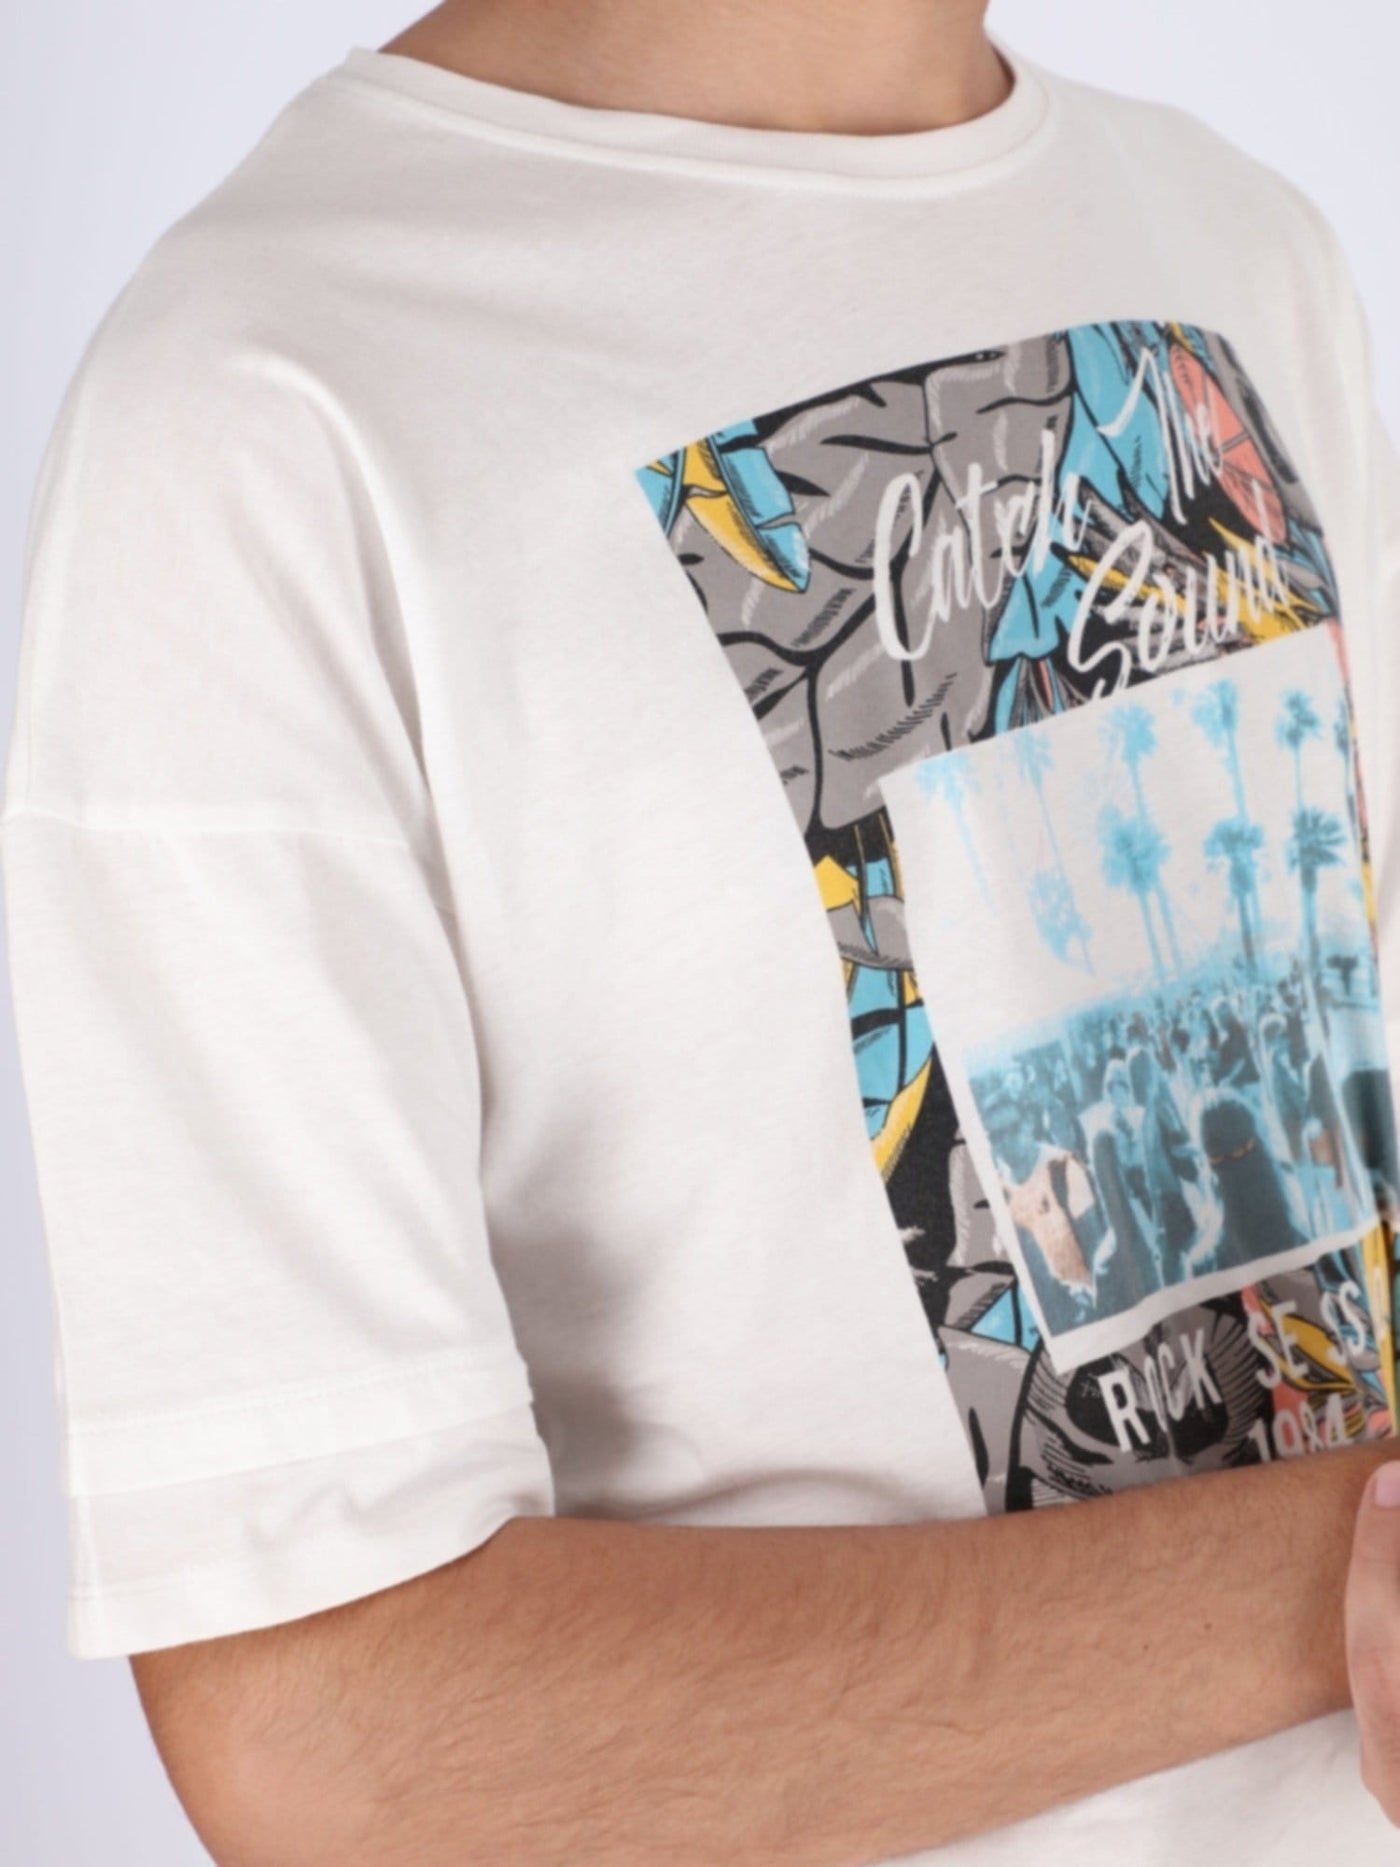 OR T-Shirts Catch the sound front print Short-Sleeve T-Shirt